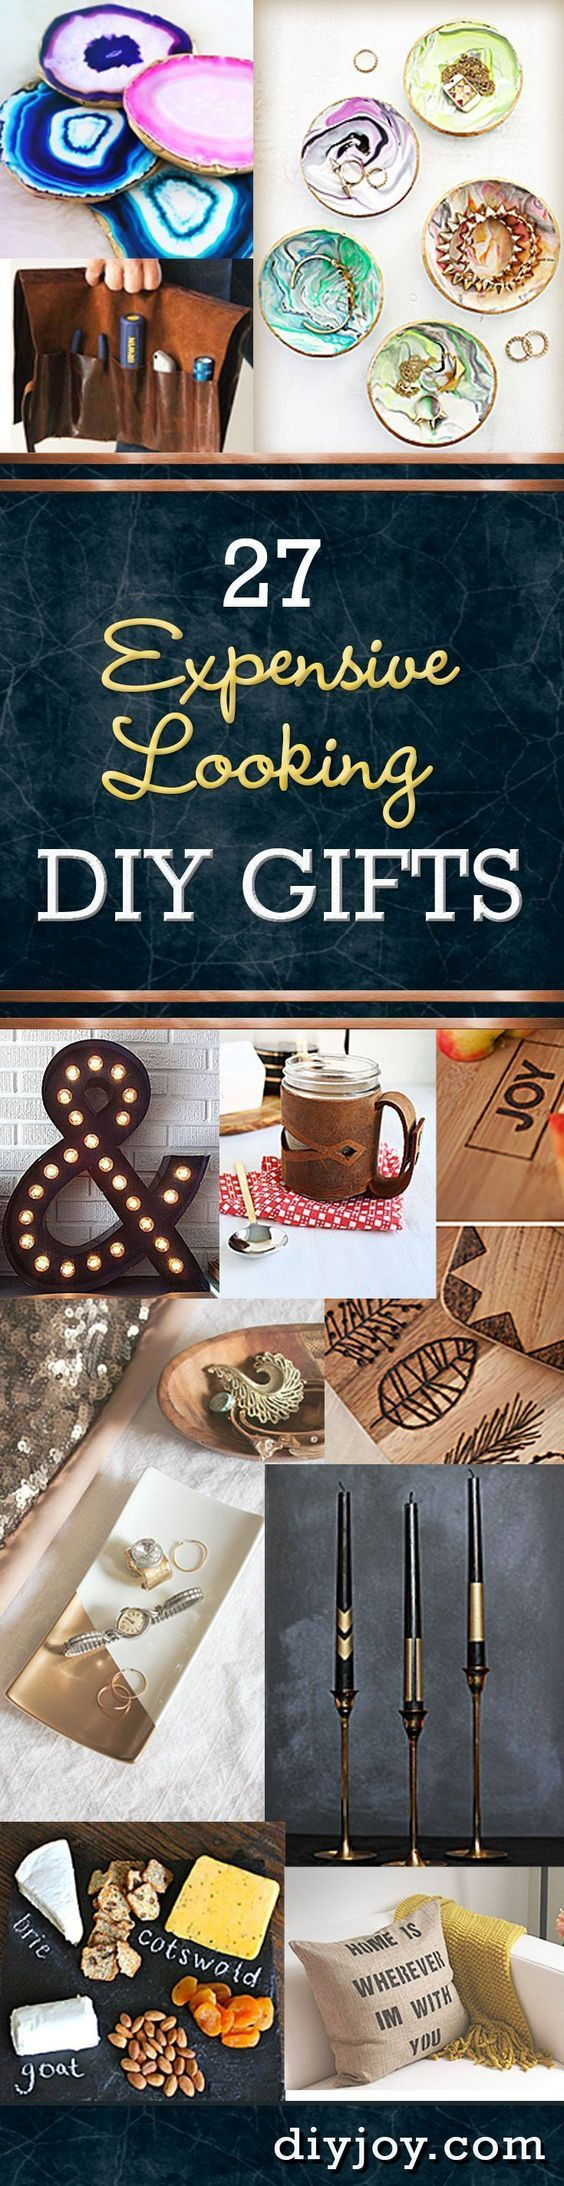 DIY Christmas Gifts For Women
 27 Expensive Looking Inexpensive DIY Gifts